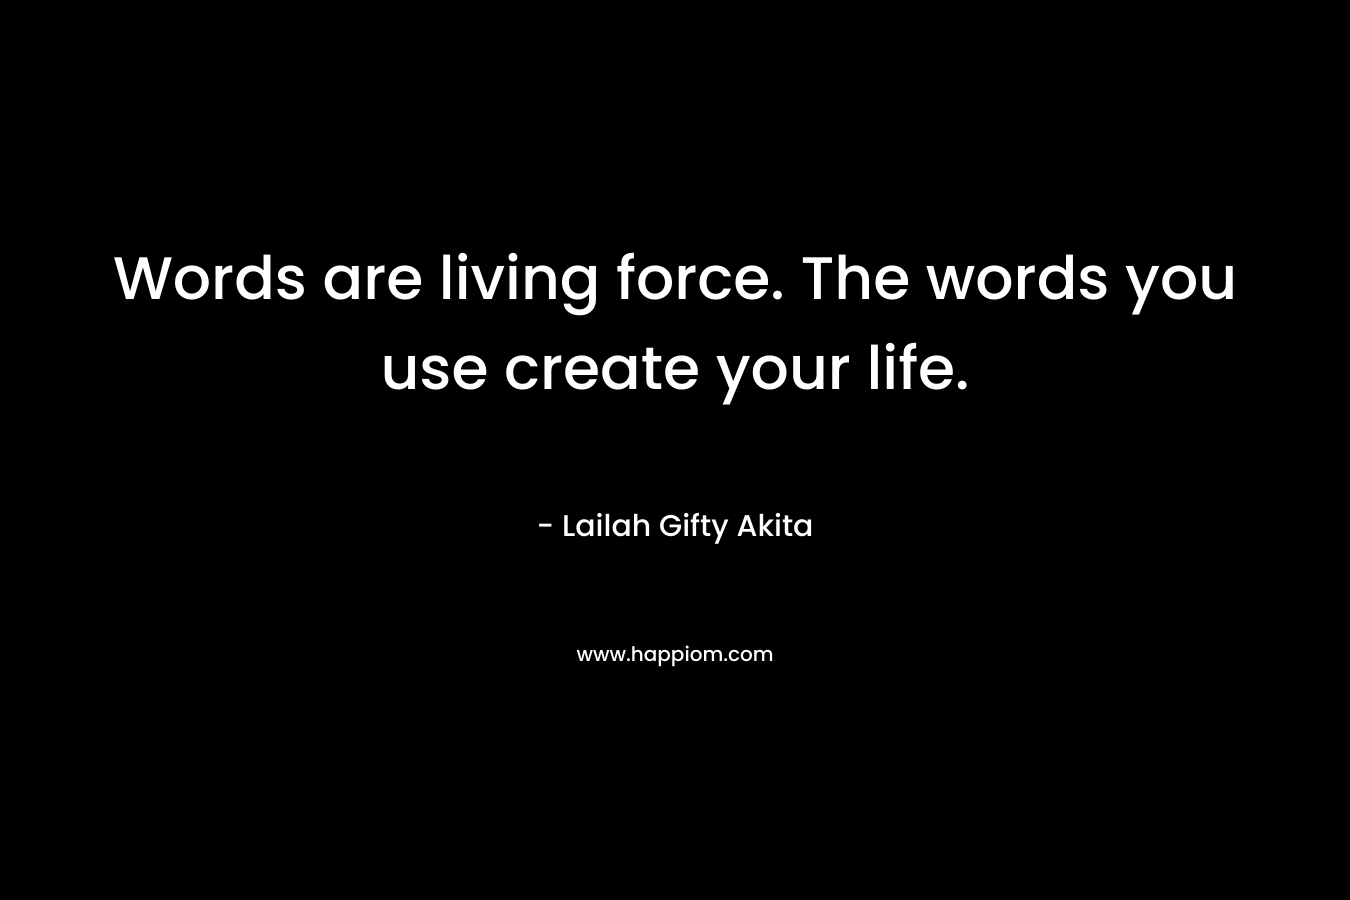 Words are living force. The words you use create your life.